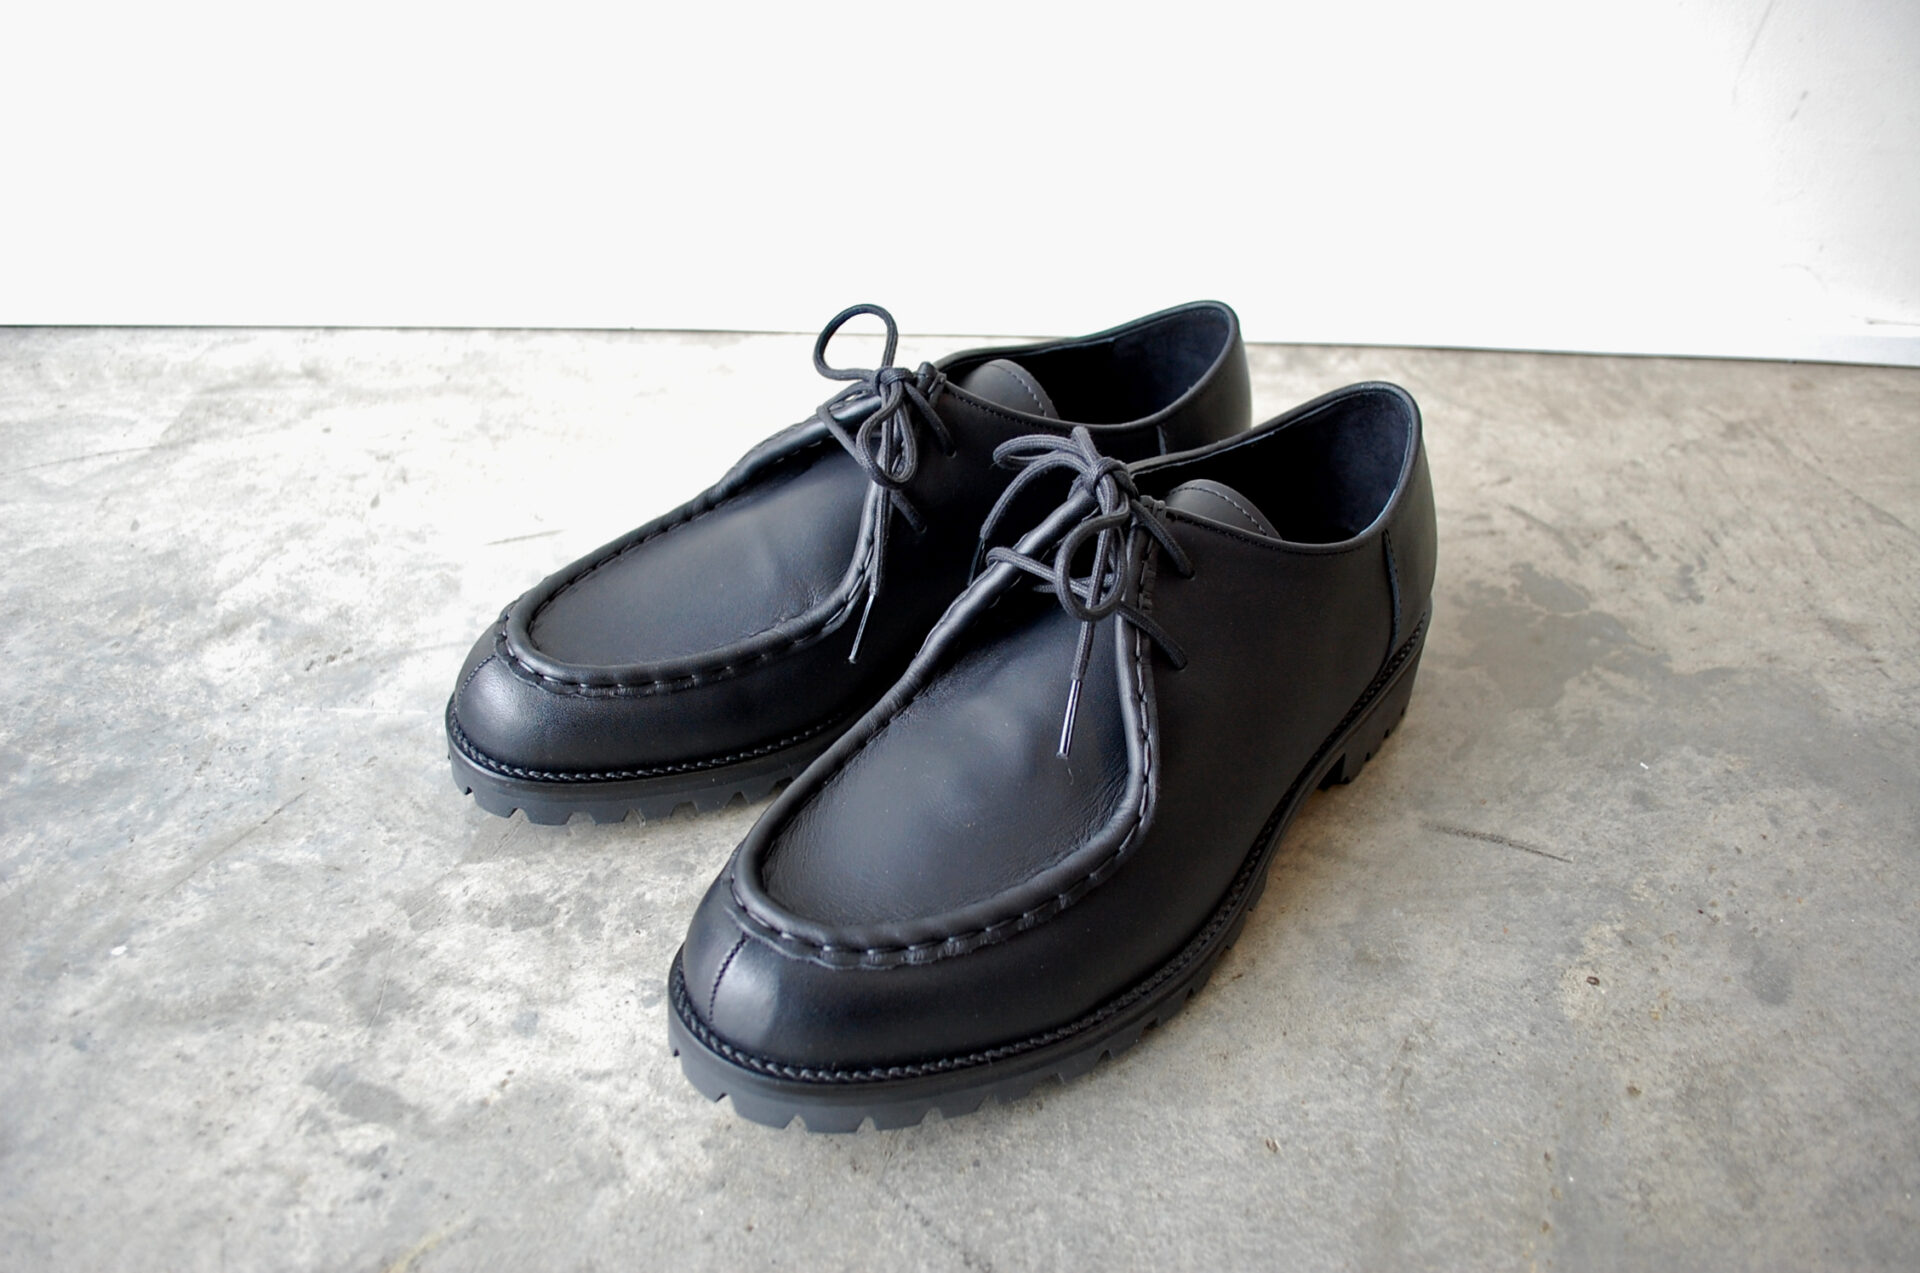 PADRONE パドローネ PU8759-2401-23A TYROLEAN SHOES (WATER PROOF